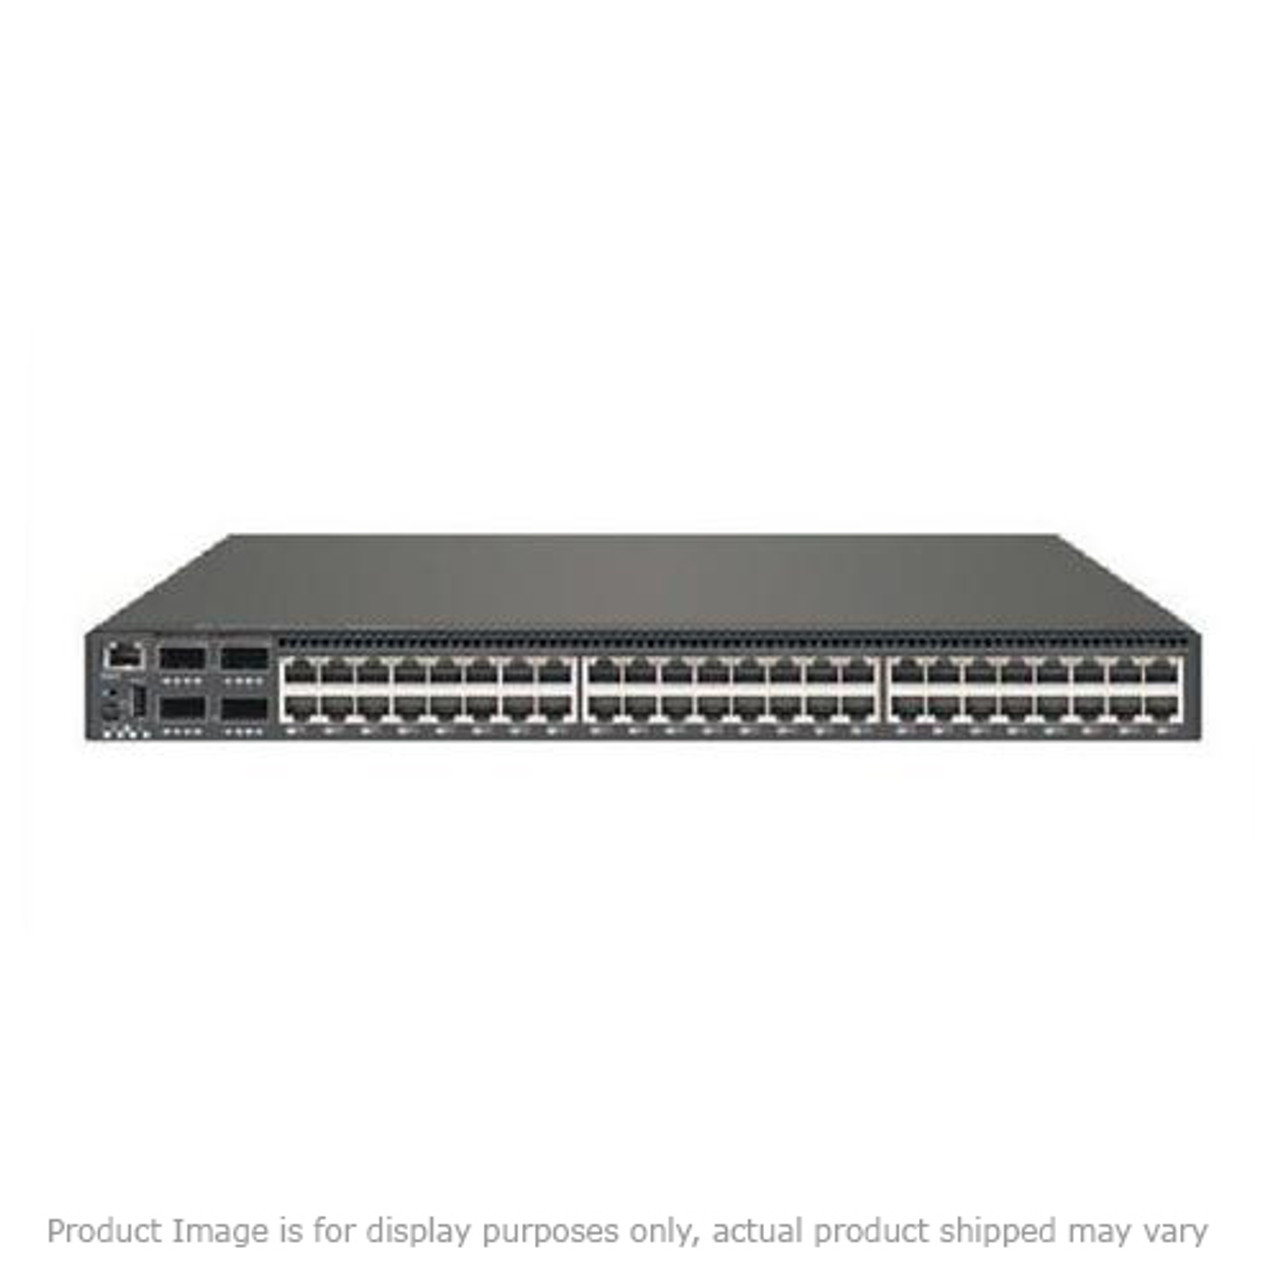 JL810A#ABG Aruba Instant On 1830 8G Switch - 8 Ports - Manageable - Gigabit Ethernet - 10/100/1000Base-T - 2 Layer Supported - Power Adapter - 5.90 W Power